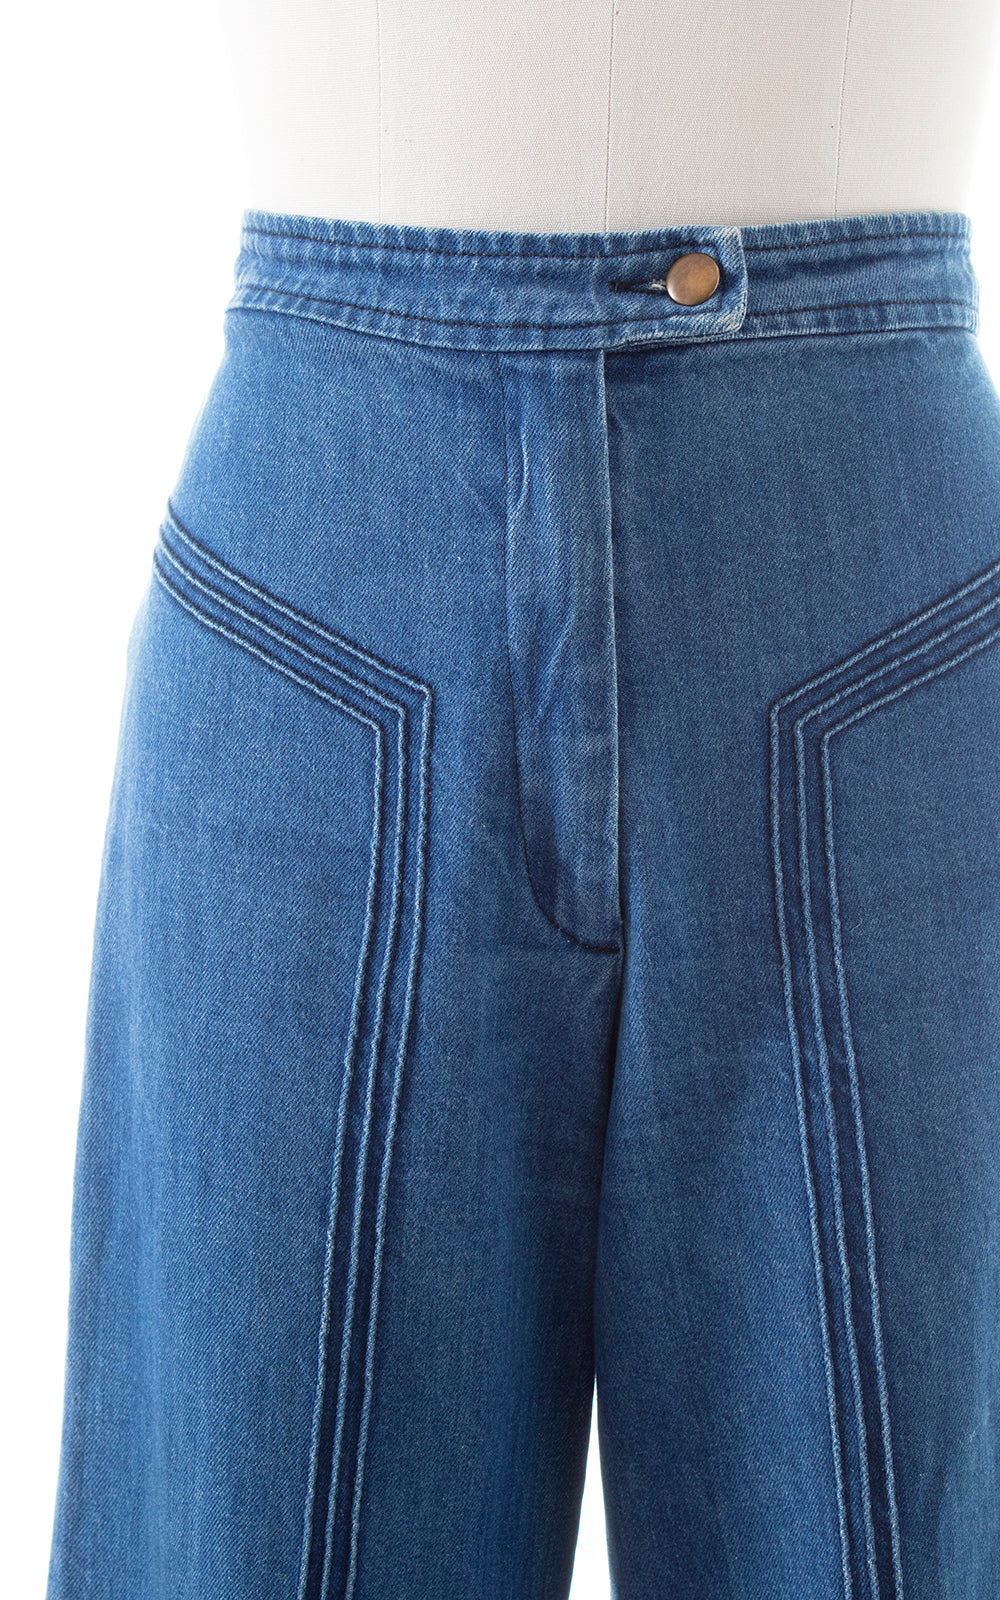 Modern STONED IMMACULATE 1970s Style Wide Leg Jeans | medium/large